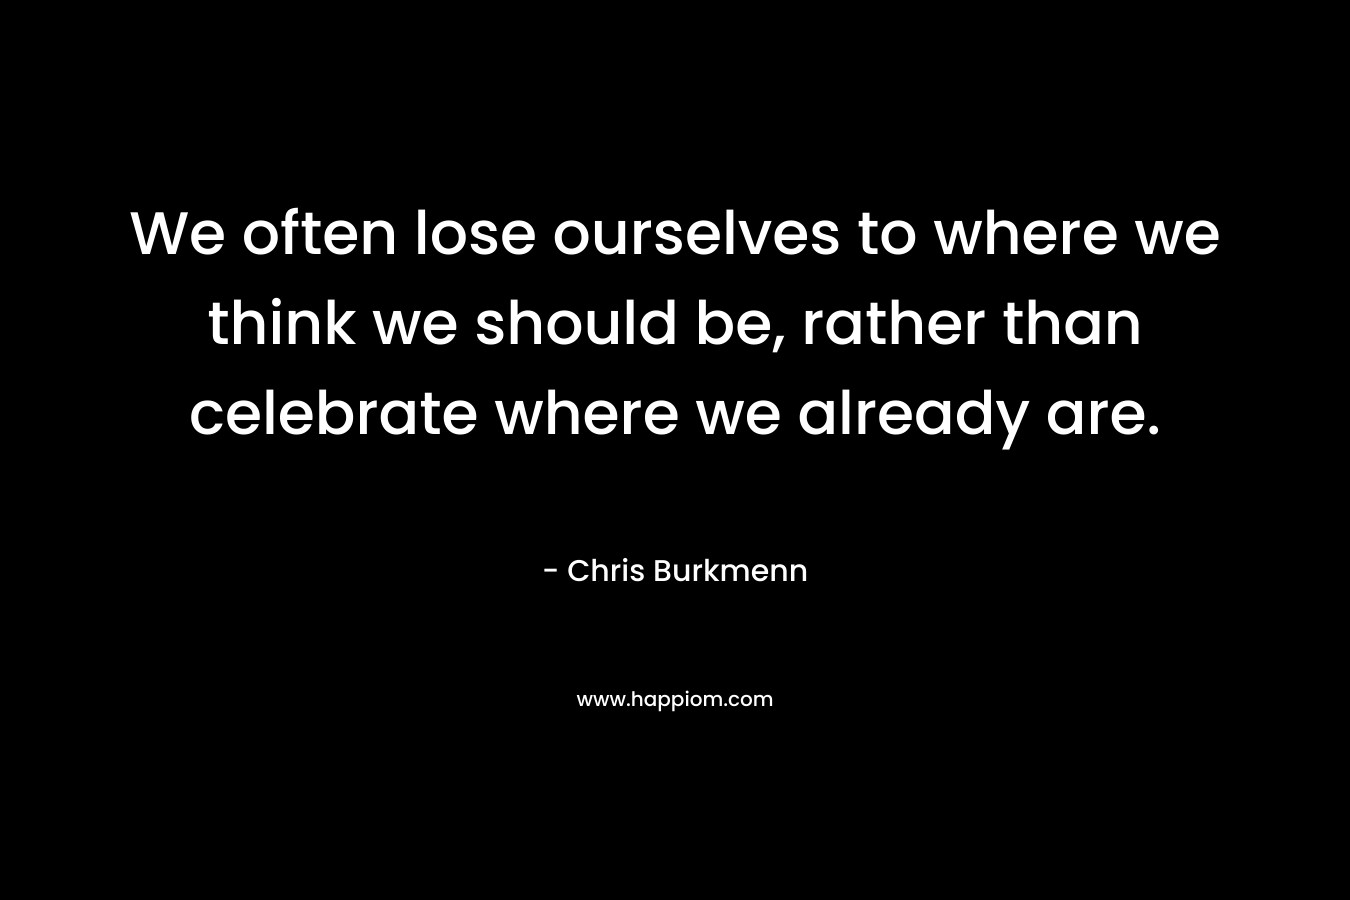 We often lose ourselves to where we think we should be, rather than celebrate where we already are.